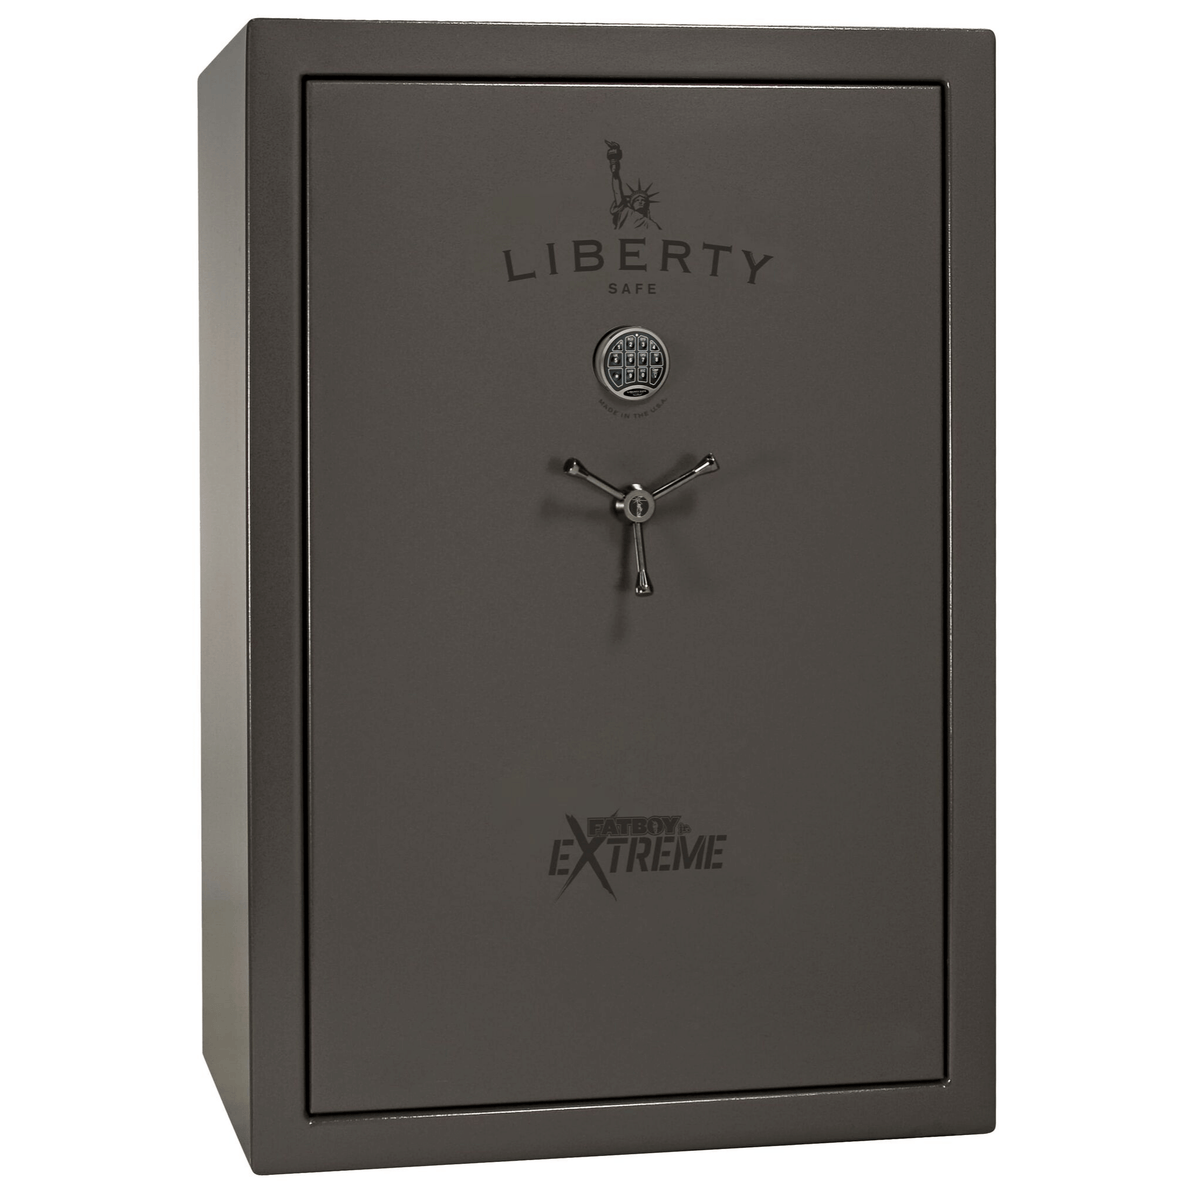 Fatboy Jr. Extreme Series | Level 4 Security | 75 Minute Fire Protection | Liberty Safe Norcal.